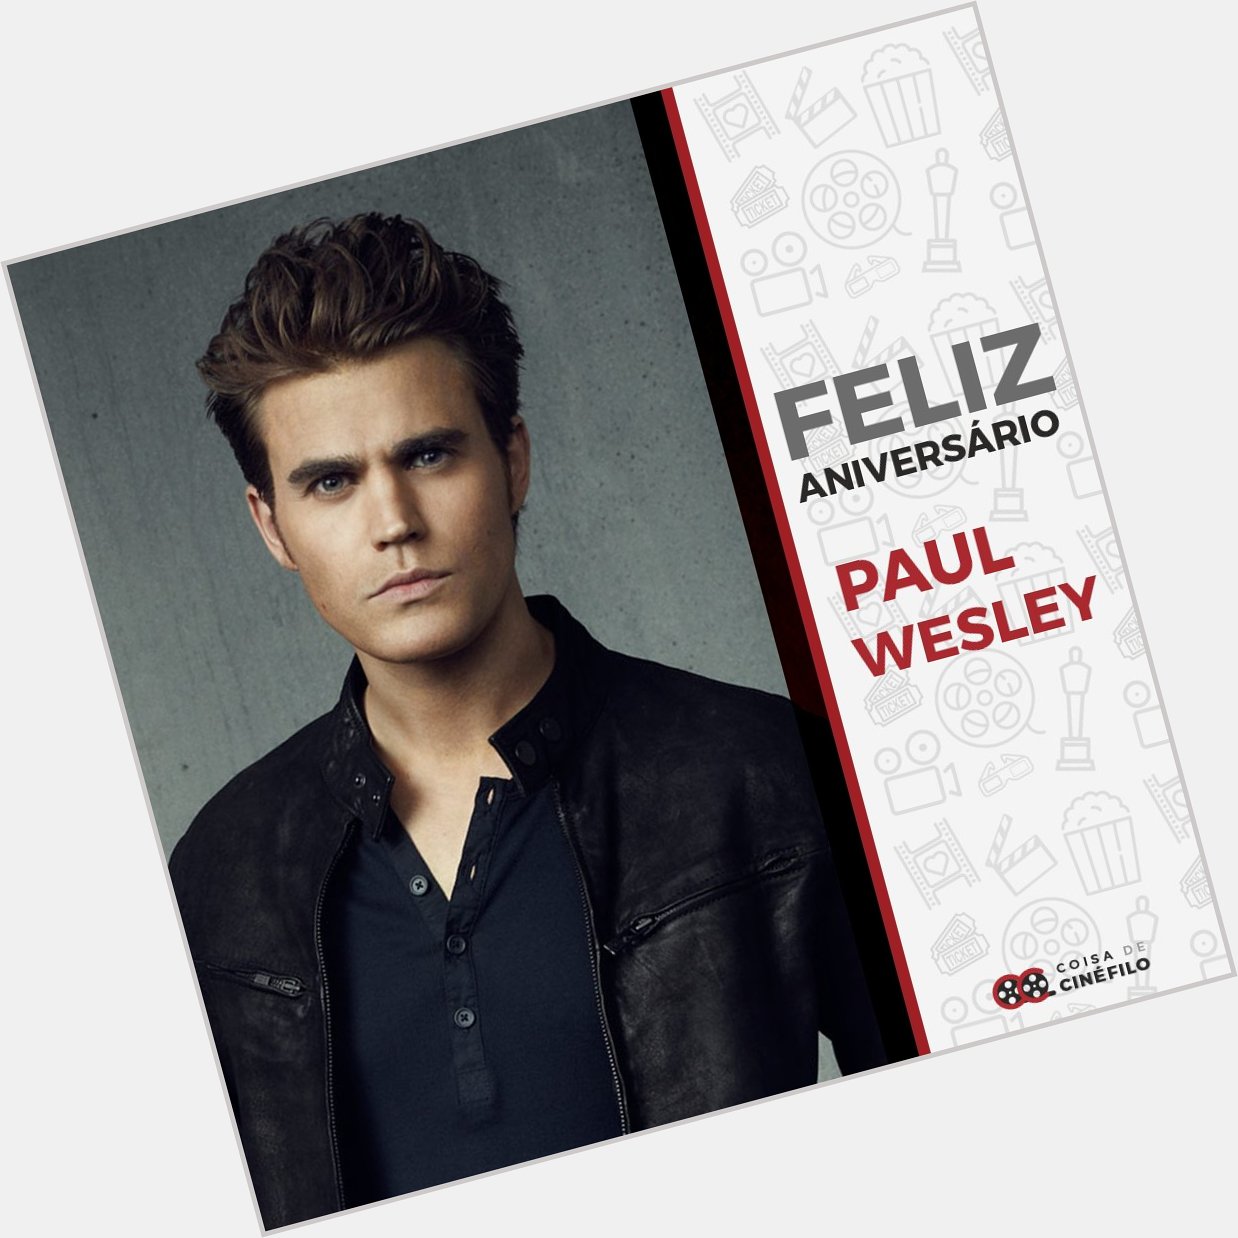 Happy birthday Paul Wesley.            You deserve the world.              